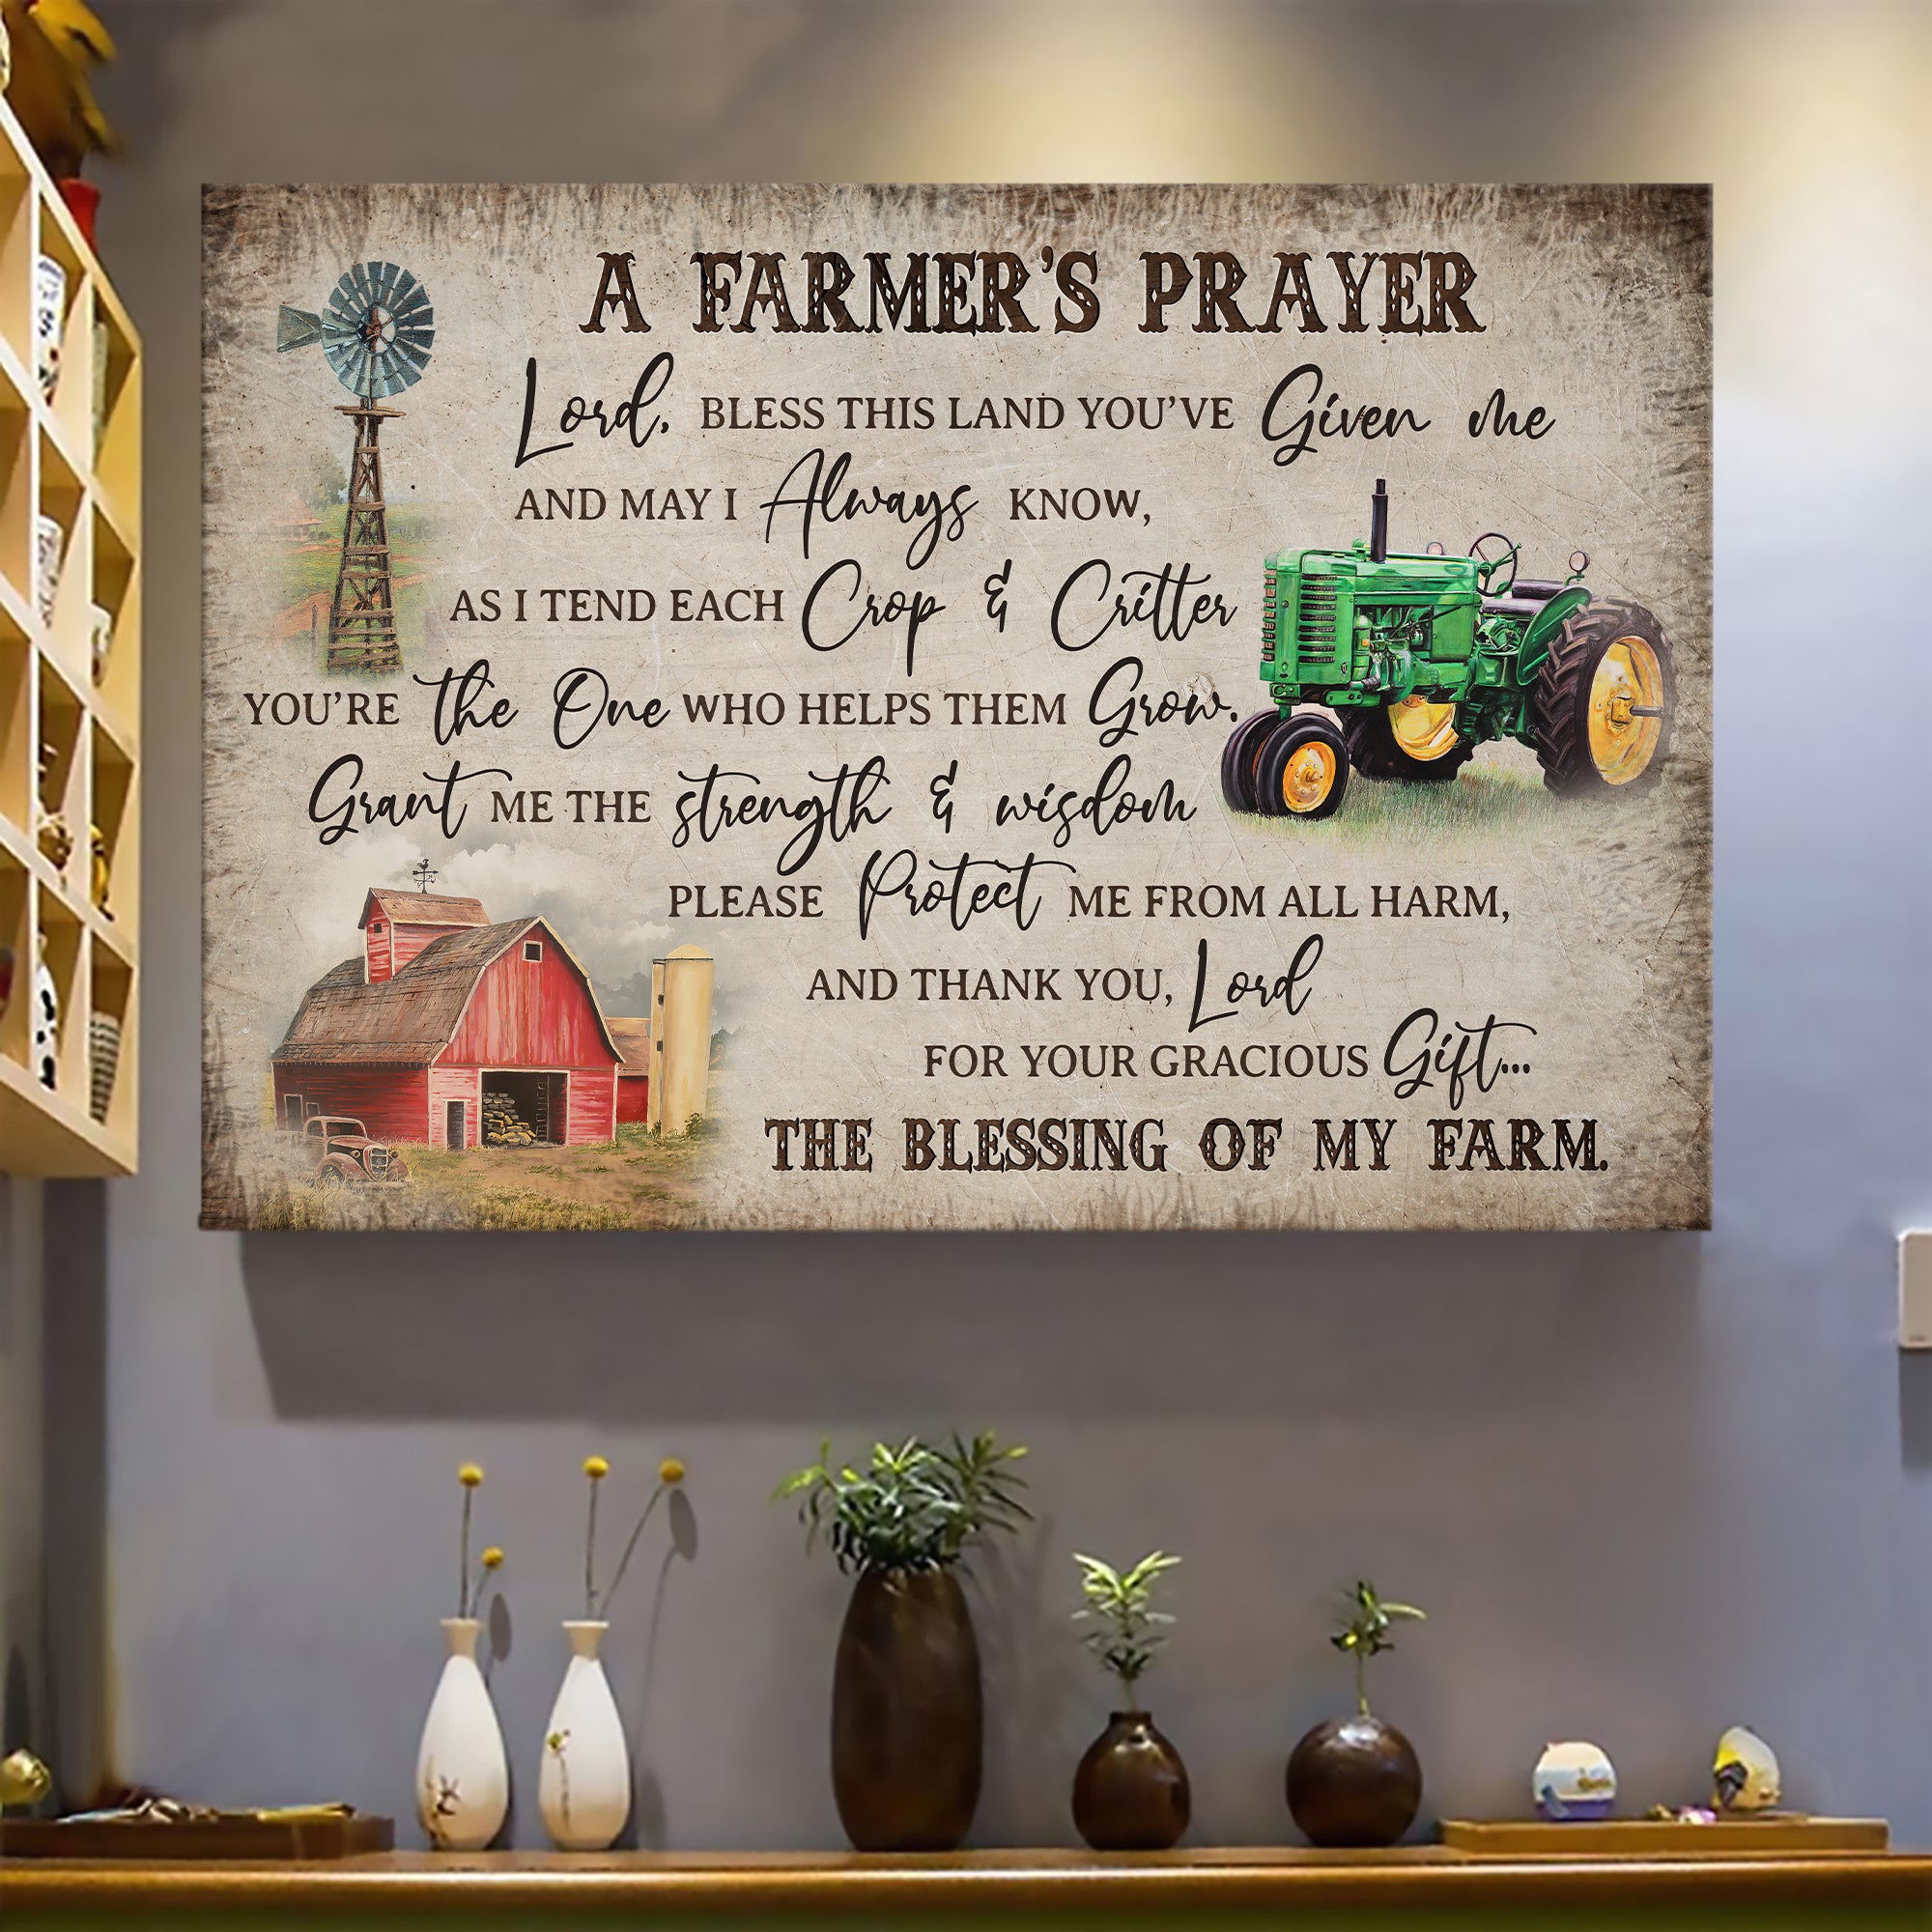 Electric tricycle, Red barn, Windmill, A farmer's prayer - Jesus Landscape Canvas Prints, Wall Art